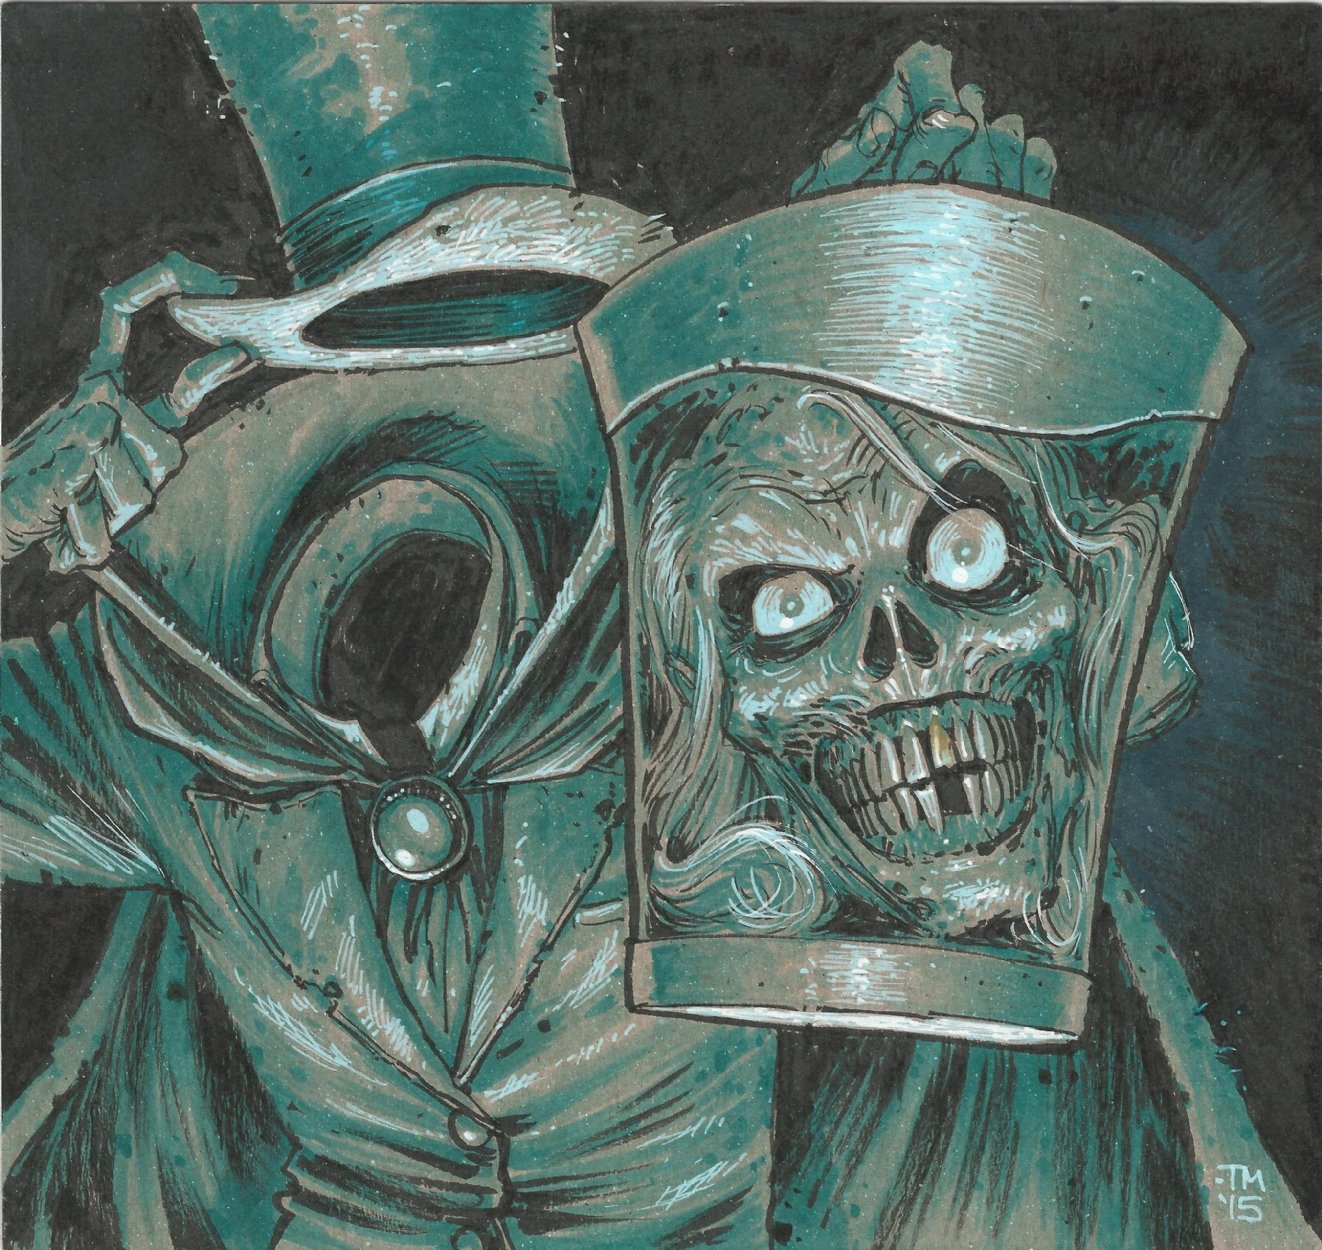 Hat Box Ghost Haunted Mansion Poster Vintage Disney, 59% OFF